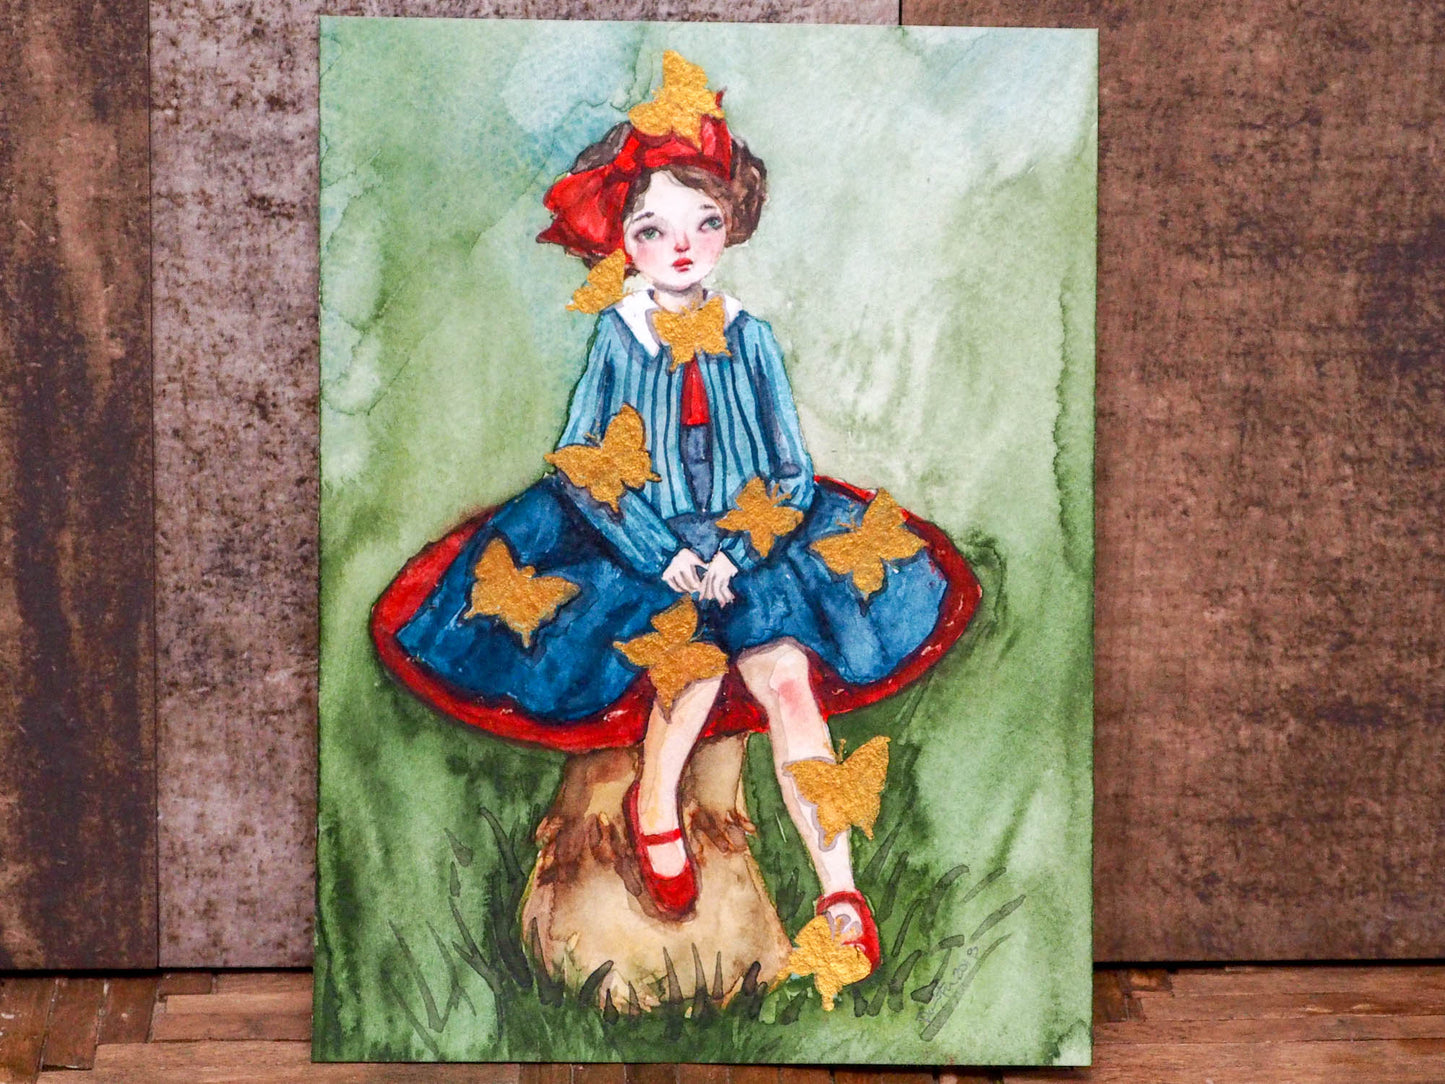 Danita painted herself sitting on a toadstool and surrounded by butterflies in this amazing watercolor original art by Danita. I painted them using a special golden painting I found on trip to Mexico, and they shimmer beautifully with the light!